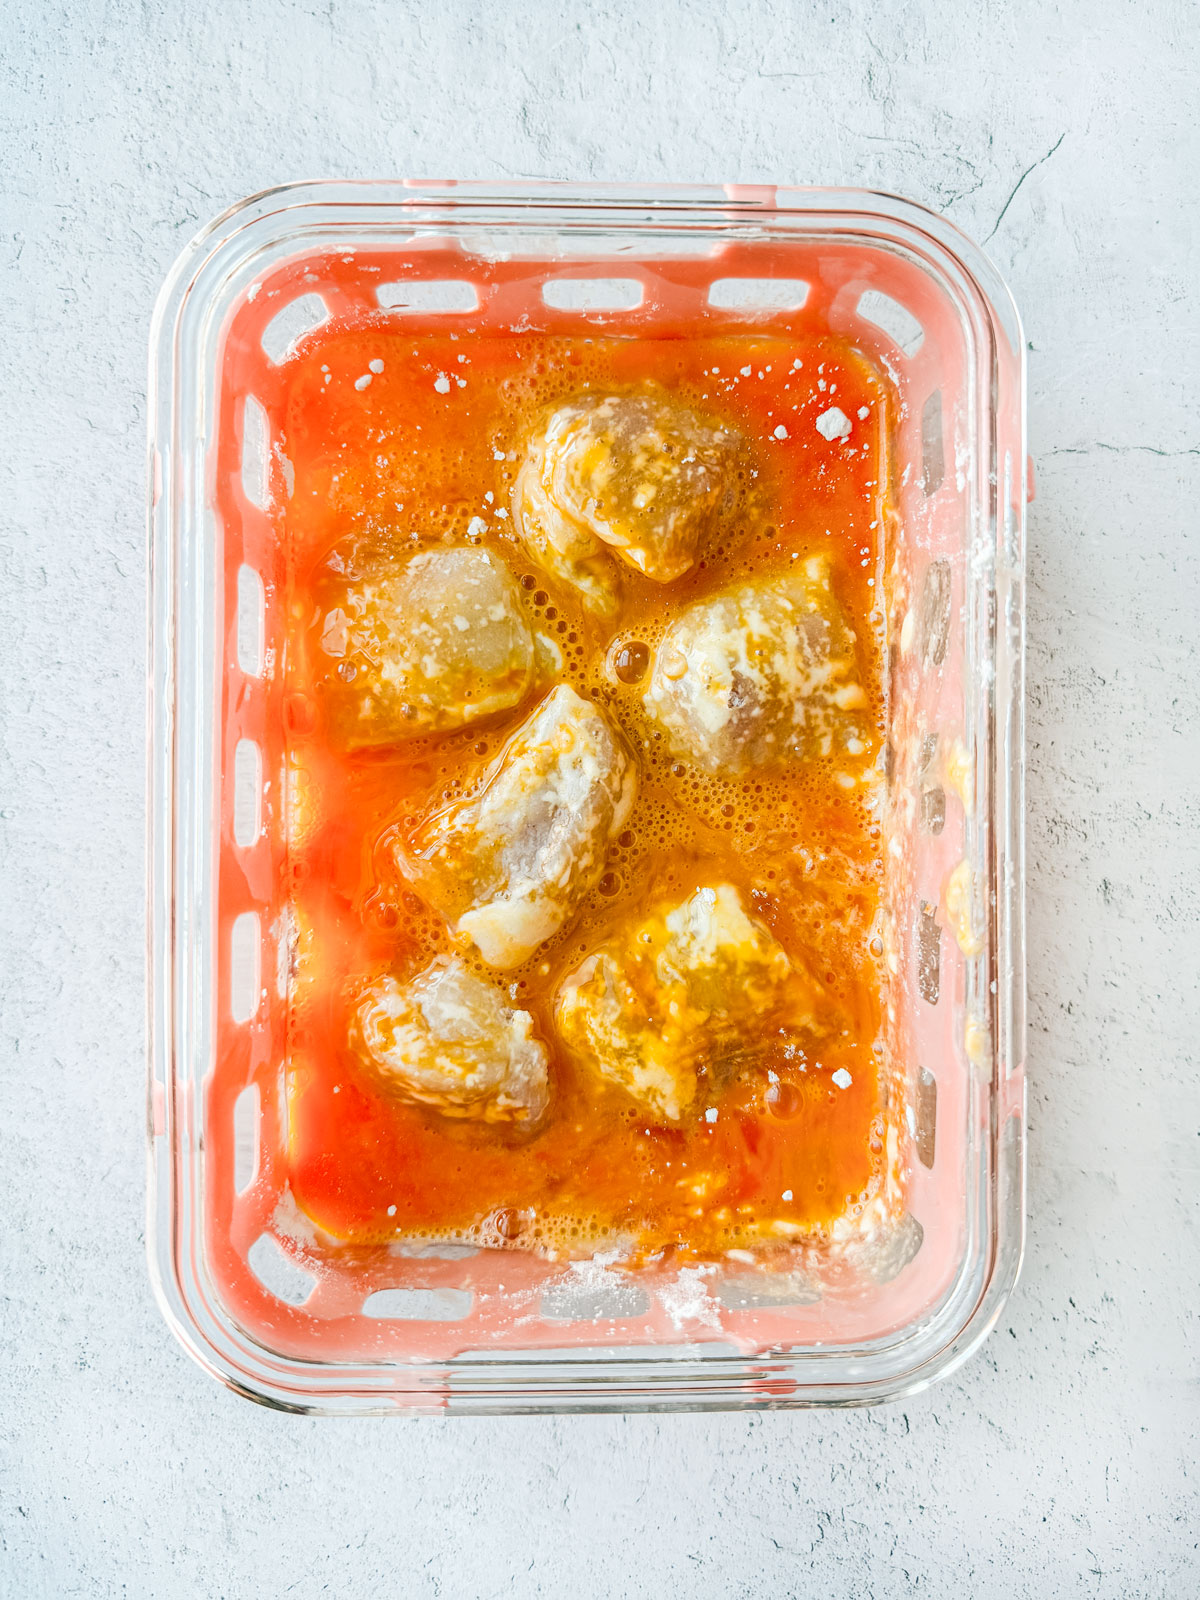 Flour-dusted chicken nuggets in a container of egg wash.